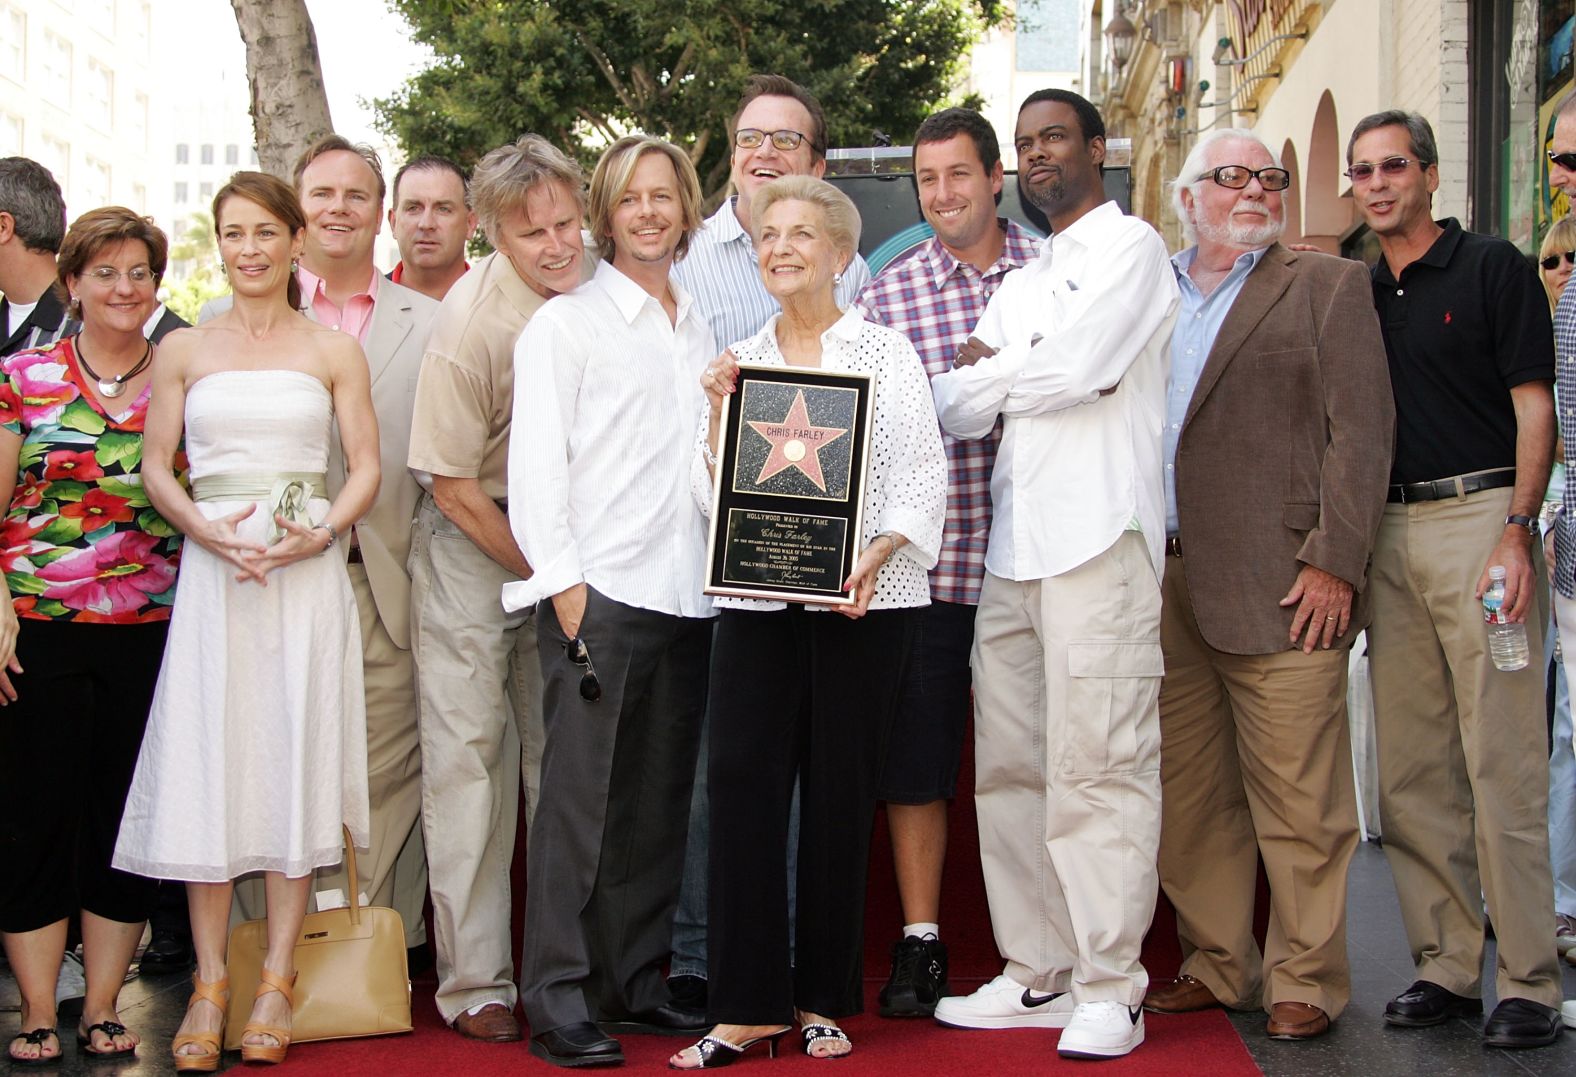 Sandler, Rock and Spade join other friends and relatives of Farley as the late actor was honored with a star on the Hollywood Walk of Fame in August 2005.